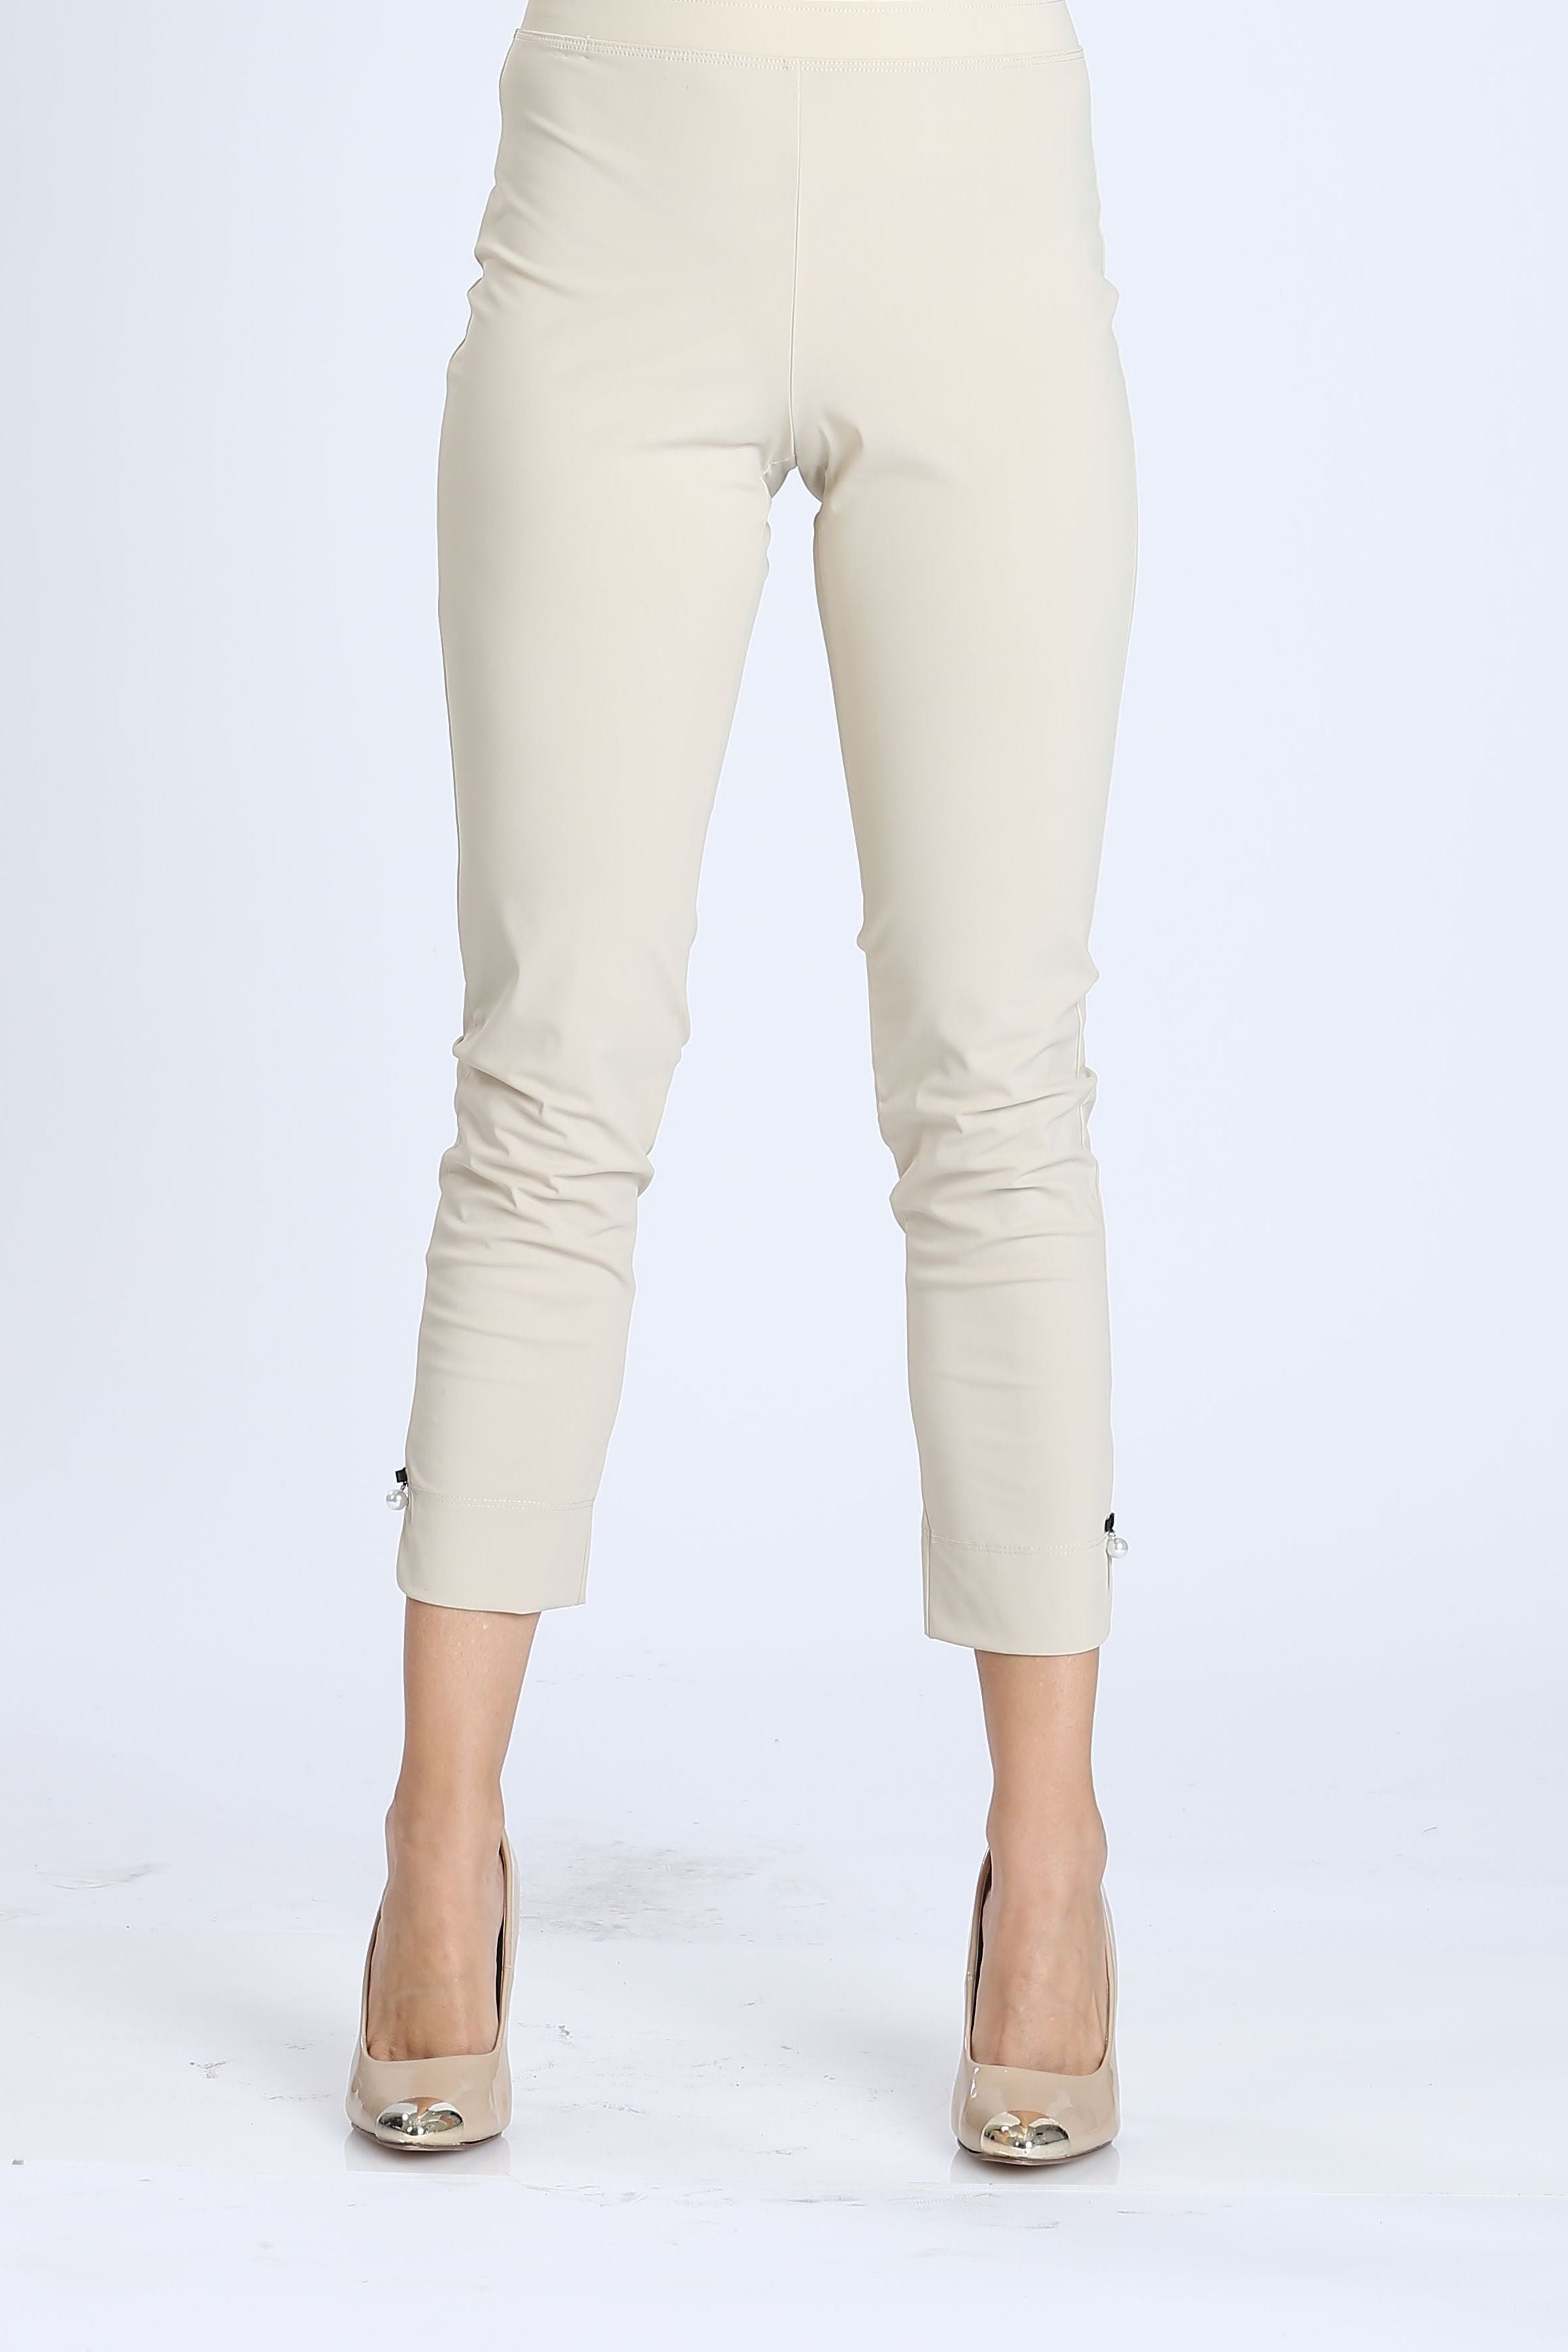 One Piece Of Pearl Style Trouser Waistband, With Removable